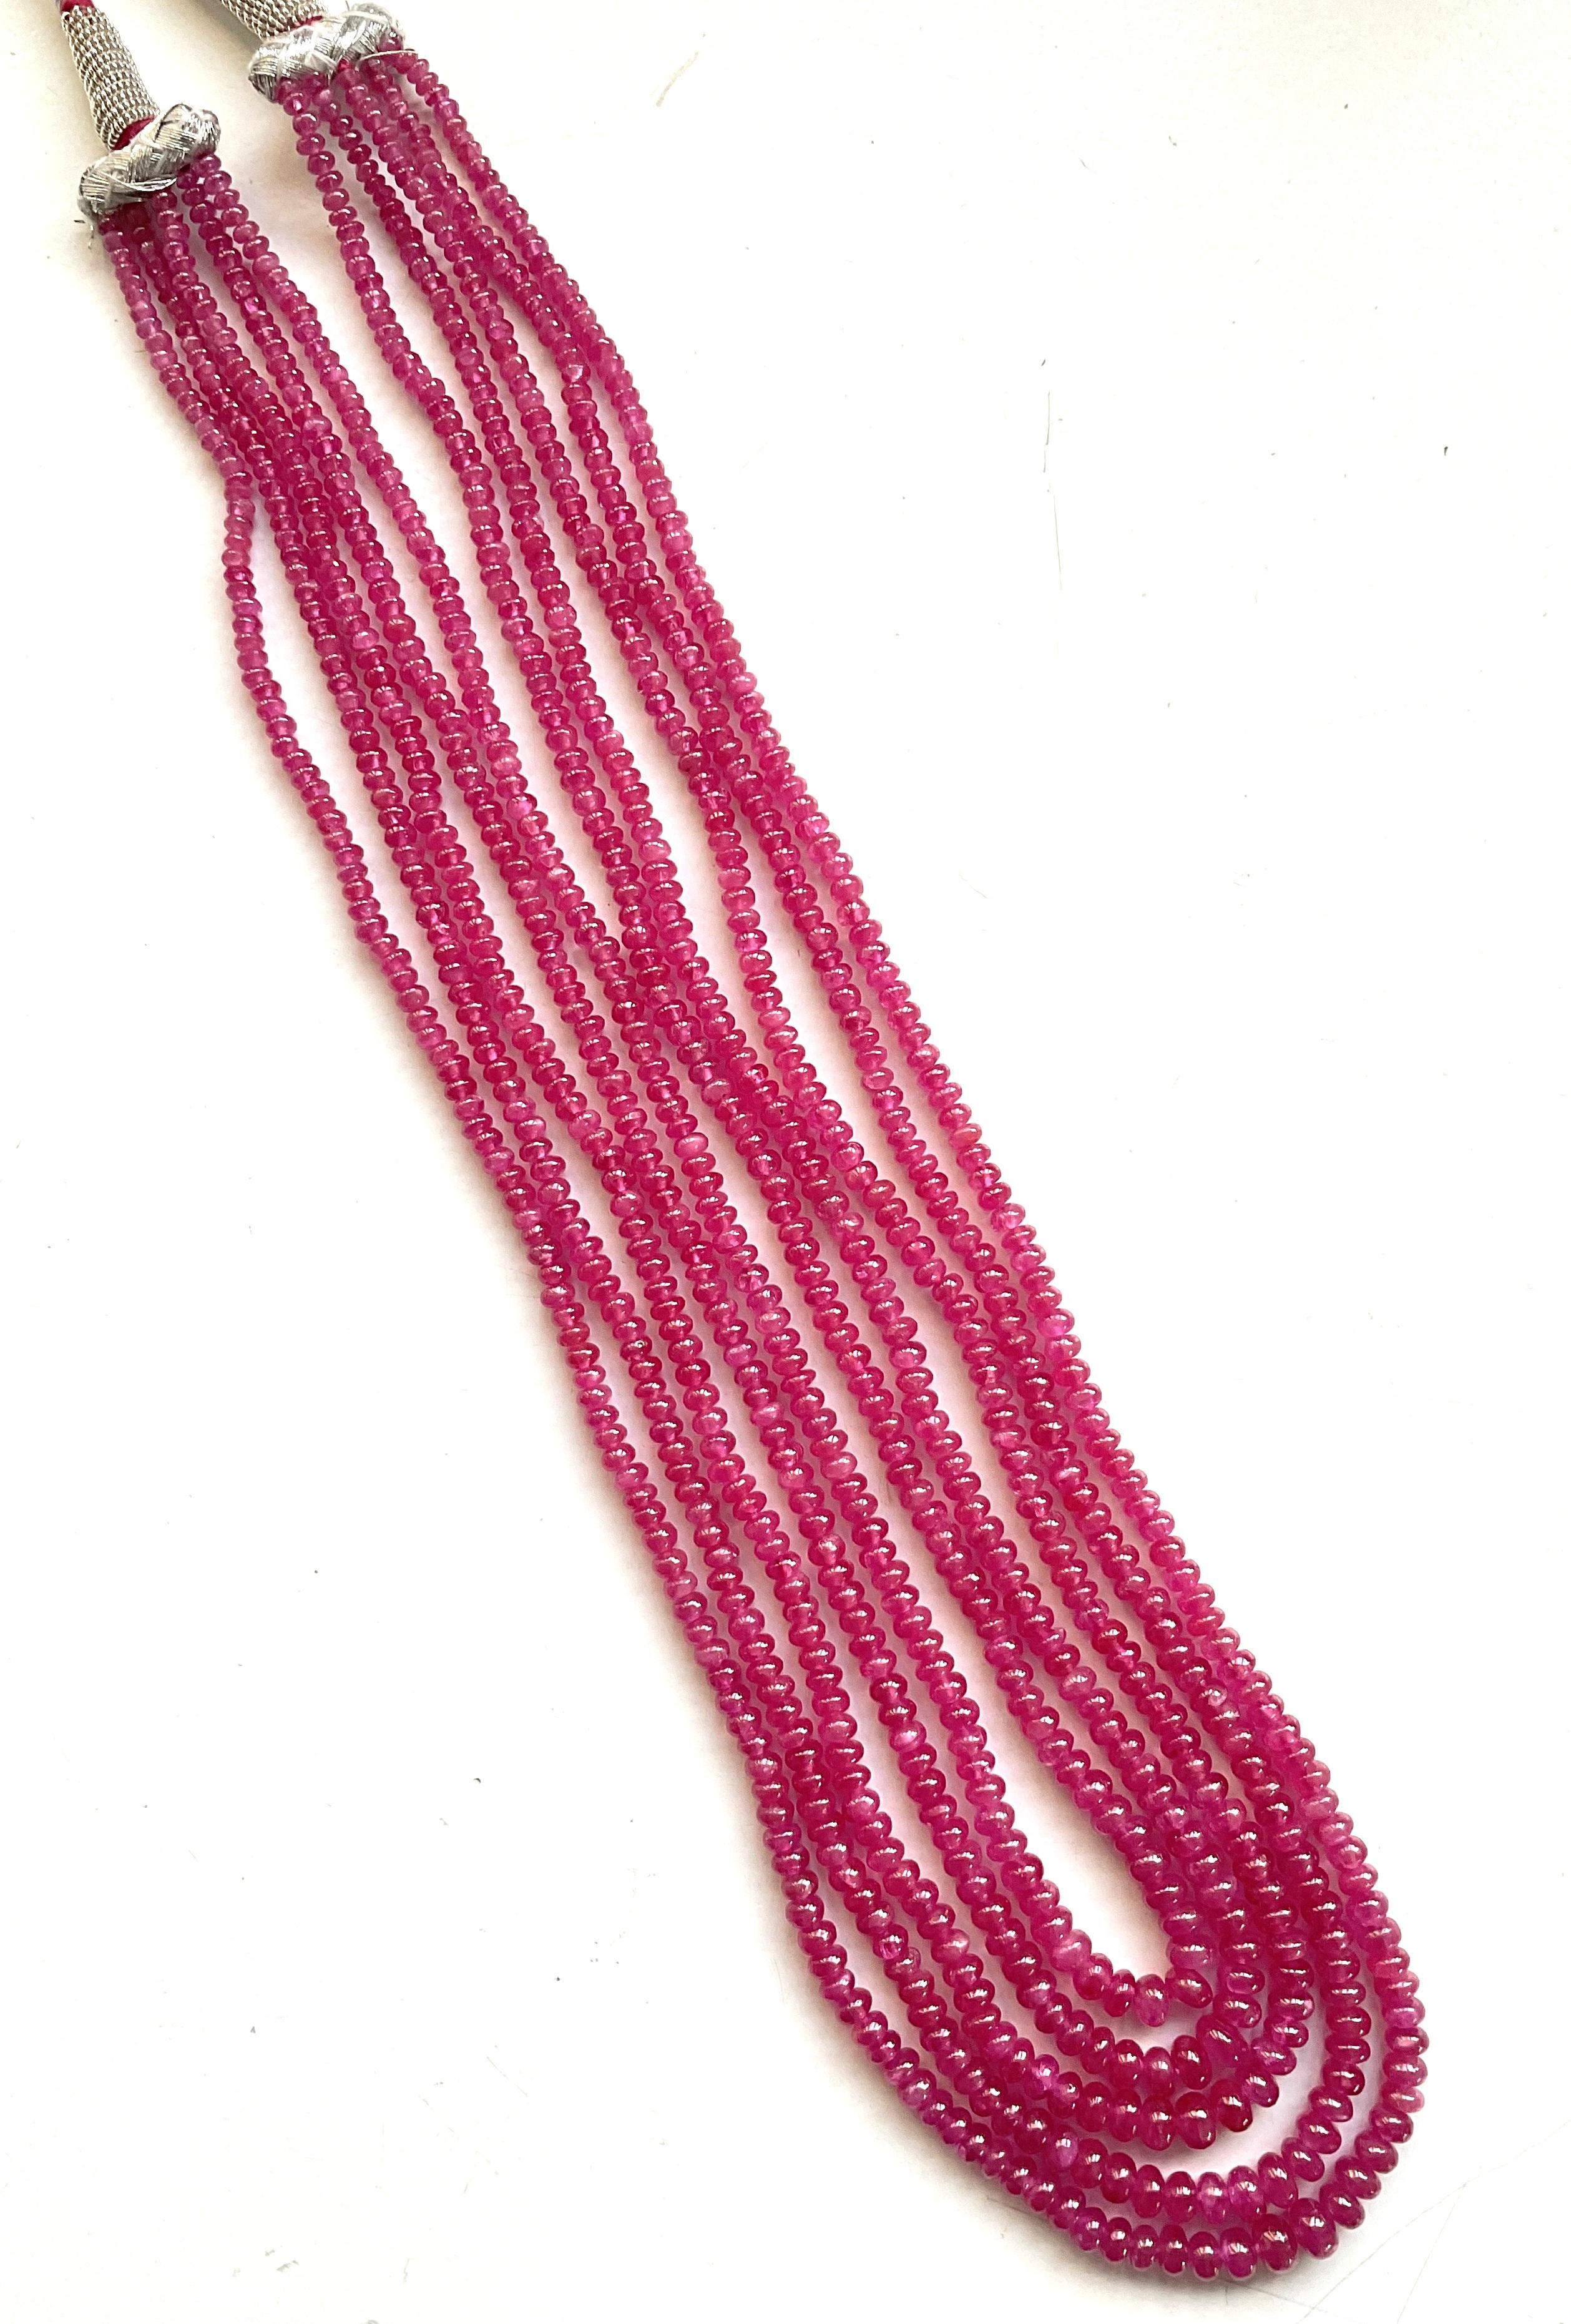 306.45 Carats Johnson Ruby Plain Beaded Necklace Top Quality Natural Gemstone


Gemstone - Ruby
Weight - 306.45 carats
Shape - Beads
Size - 3 To 5 MM
Quantity - 5 Line 